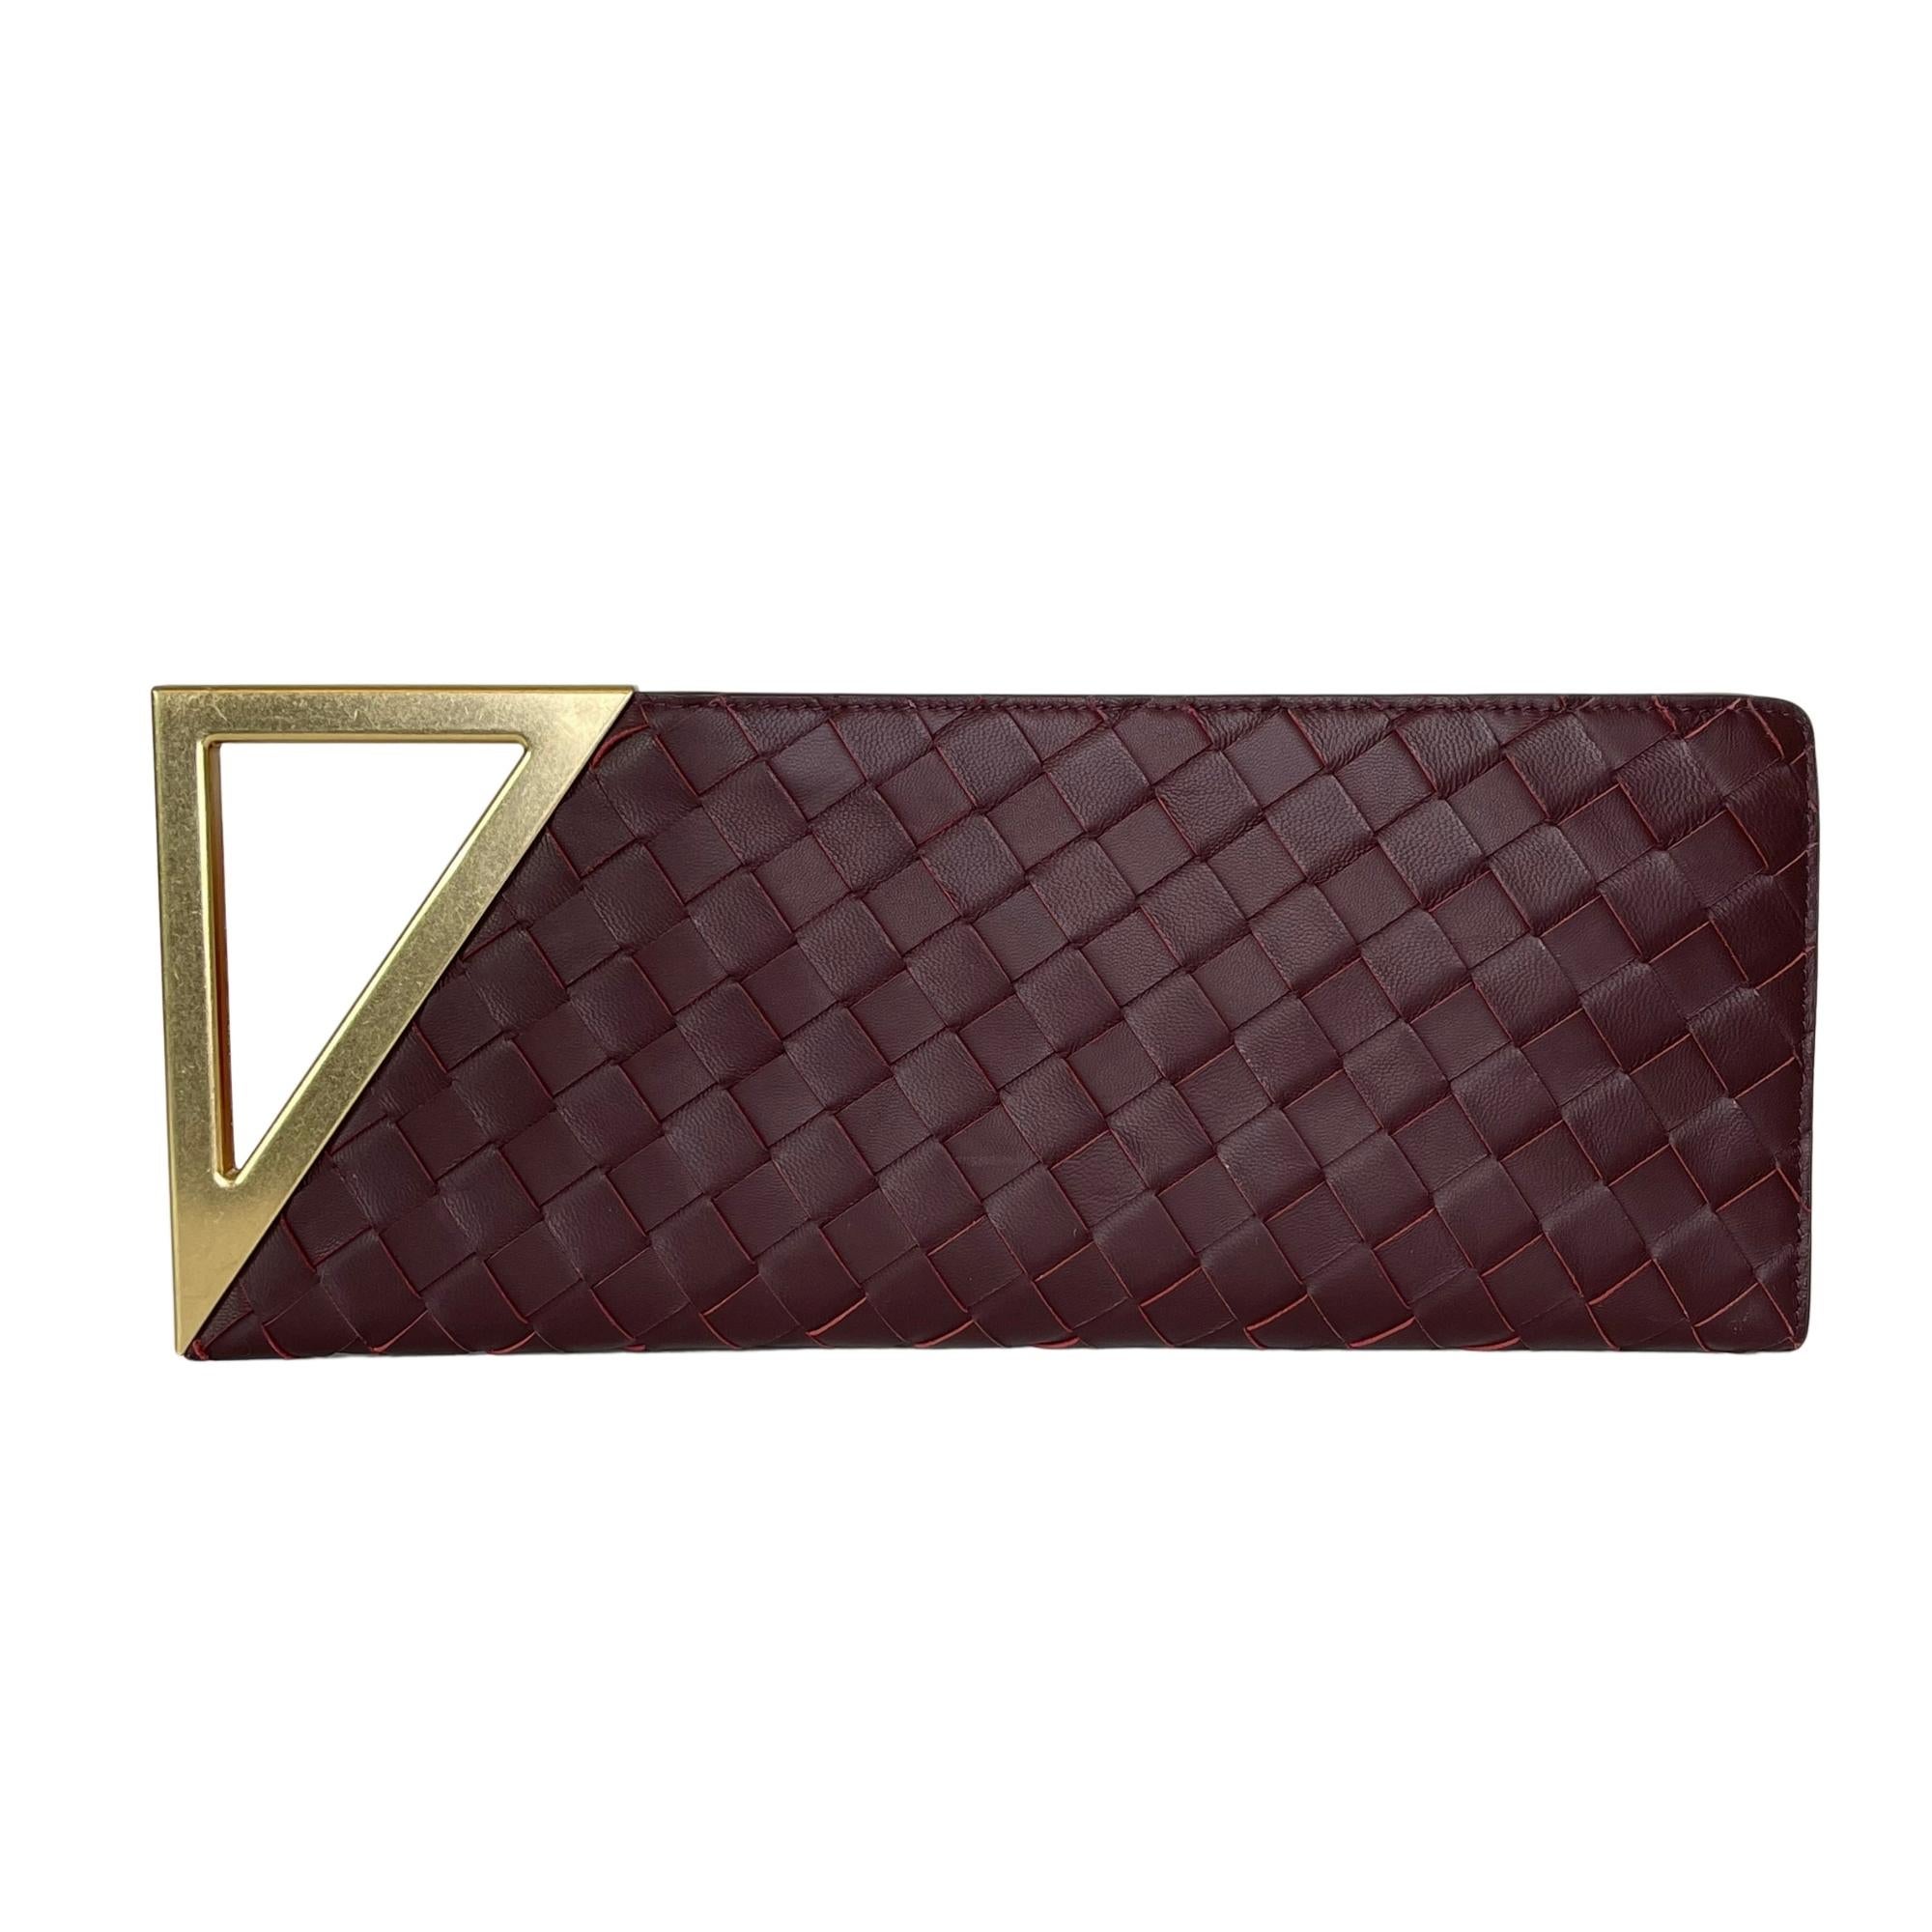 This Bottega clutch is made with intrecciato (woven) leather and features a gold-tone geometric handle, zip closure, logo zipper puller and orange suede interior lining. 

COLOR: Burgundy / Merlot
MATERIAL: Leather
MEASURES: H 5” x L 13” x D